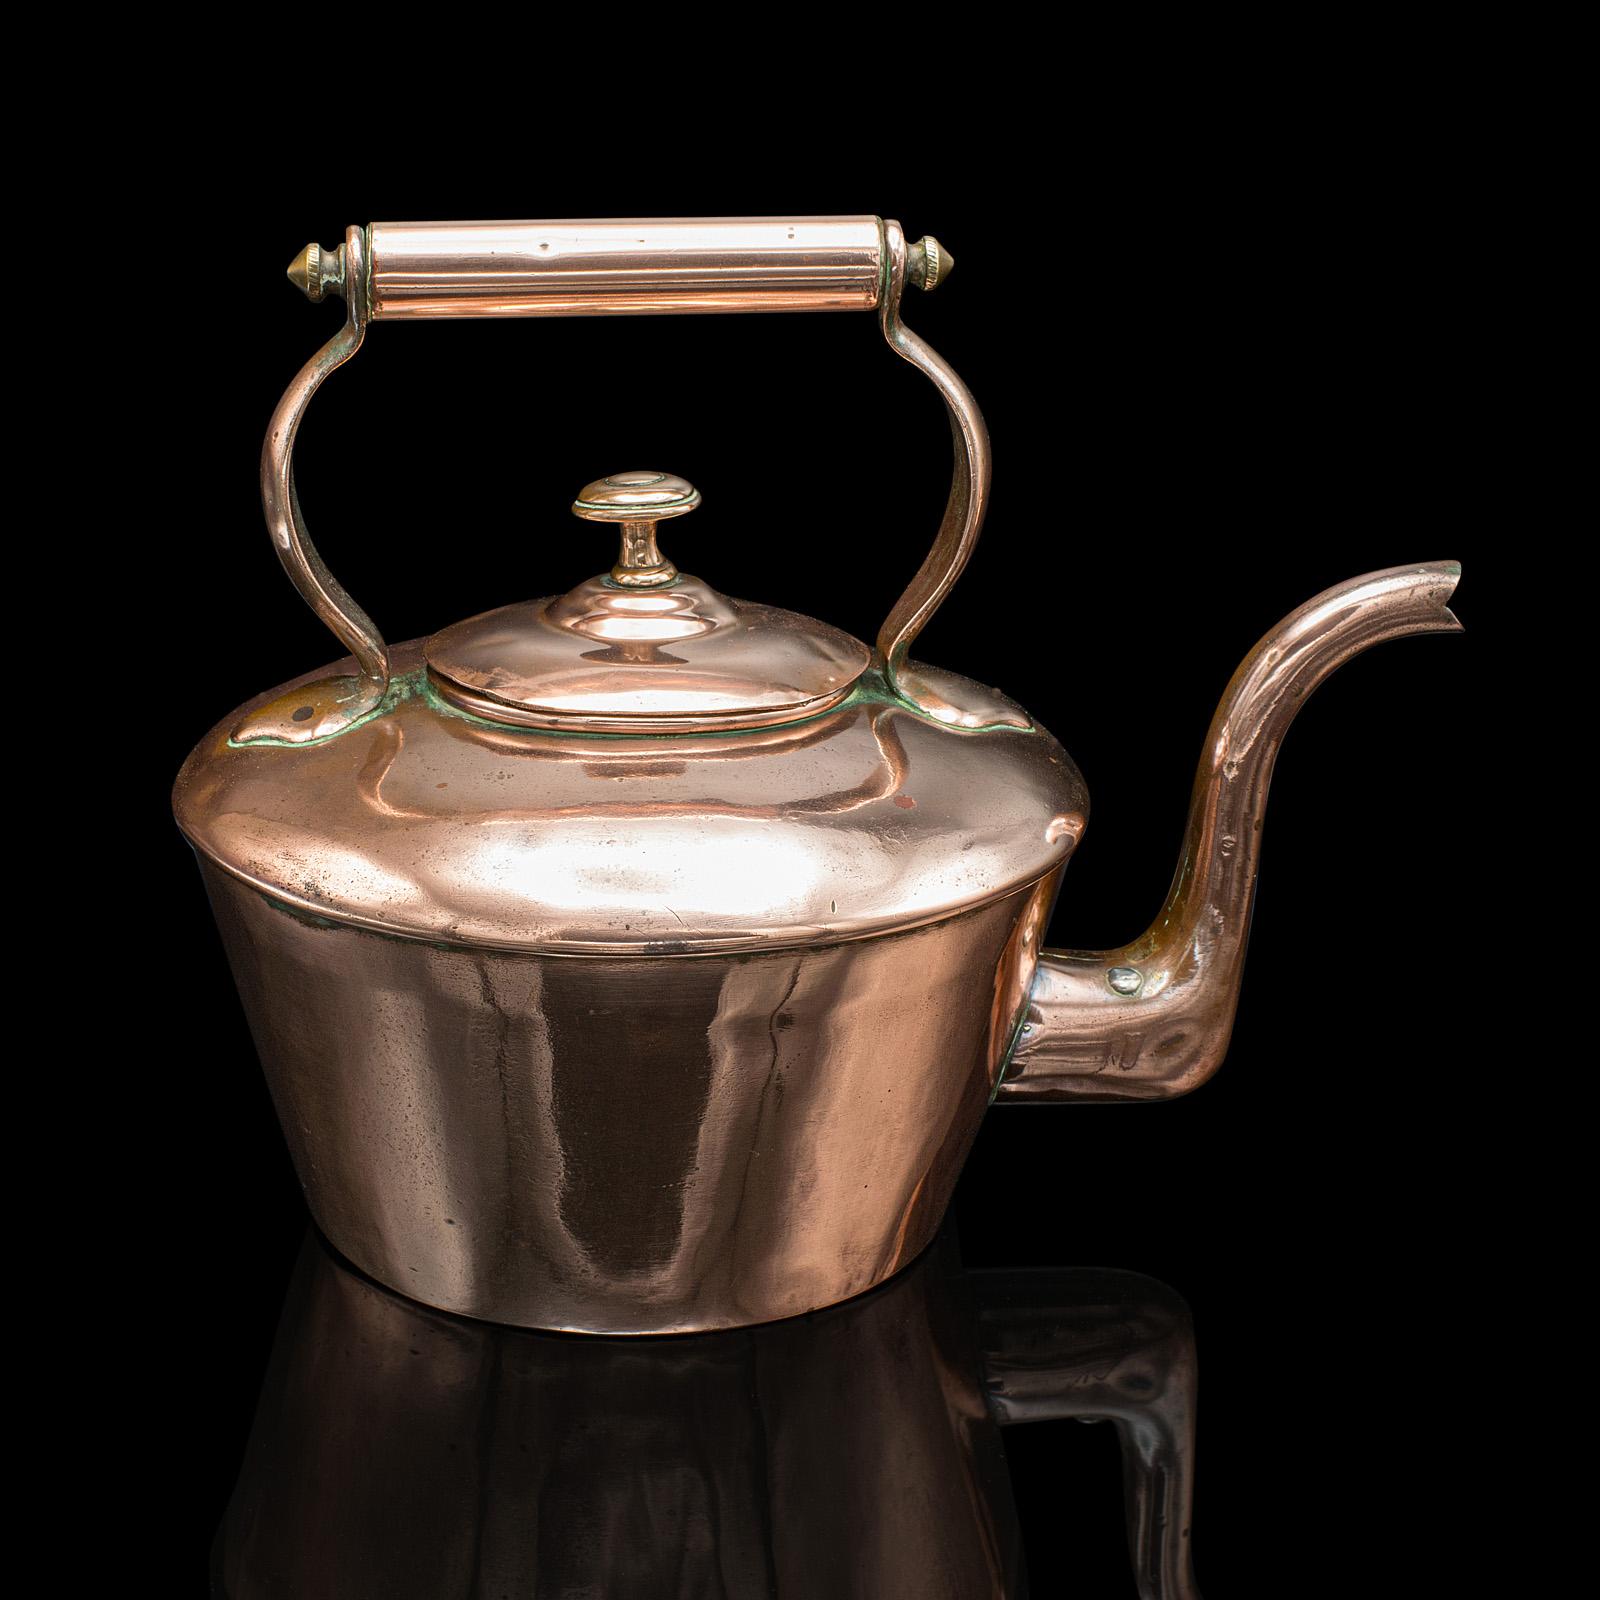 Antique Scullery Kettle, English, Copper, Stovetop Teapot, Victorian, Circa 1870 In Good Condition For Sale In Hele, Devon, GB